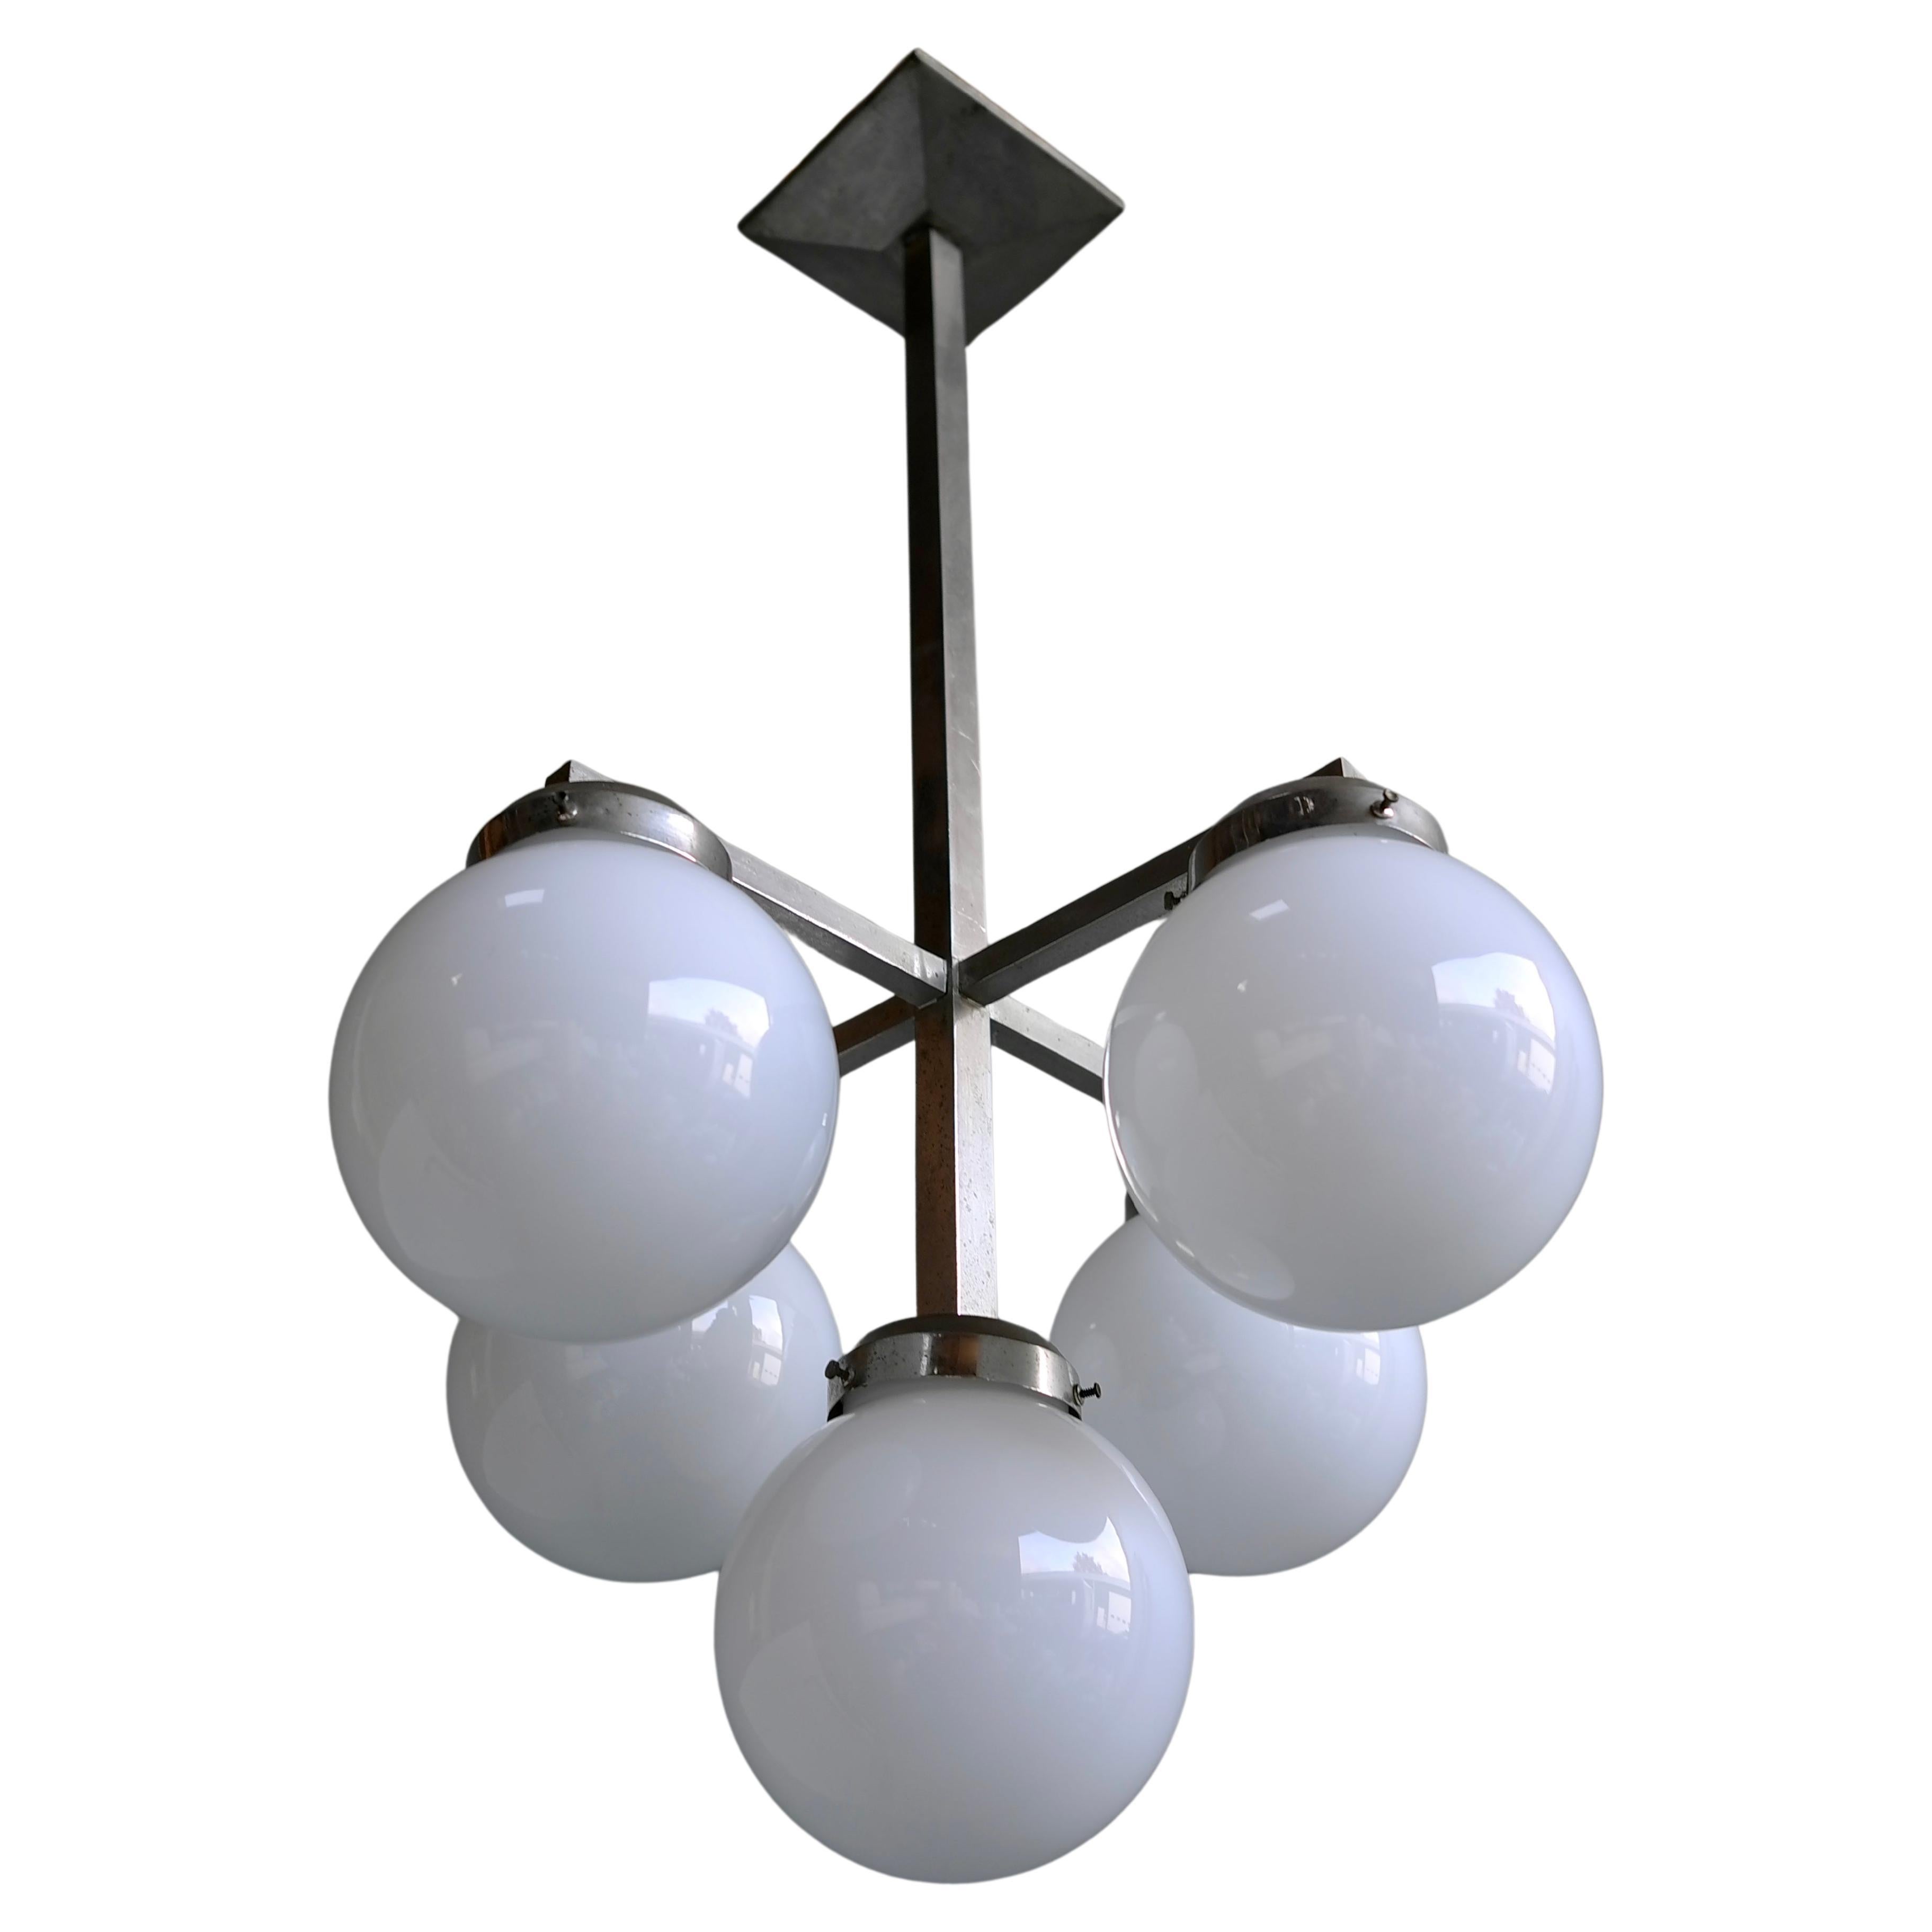 Monumental Art Deco Pendant in Metal with White Glass Balls, circa 1930 For Sale